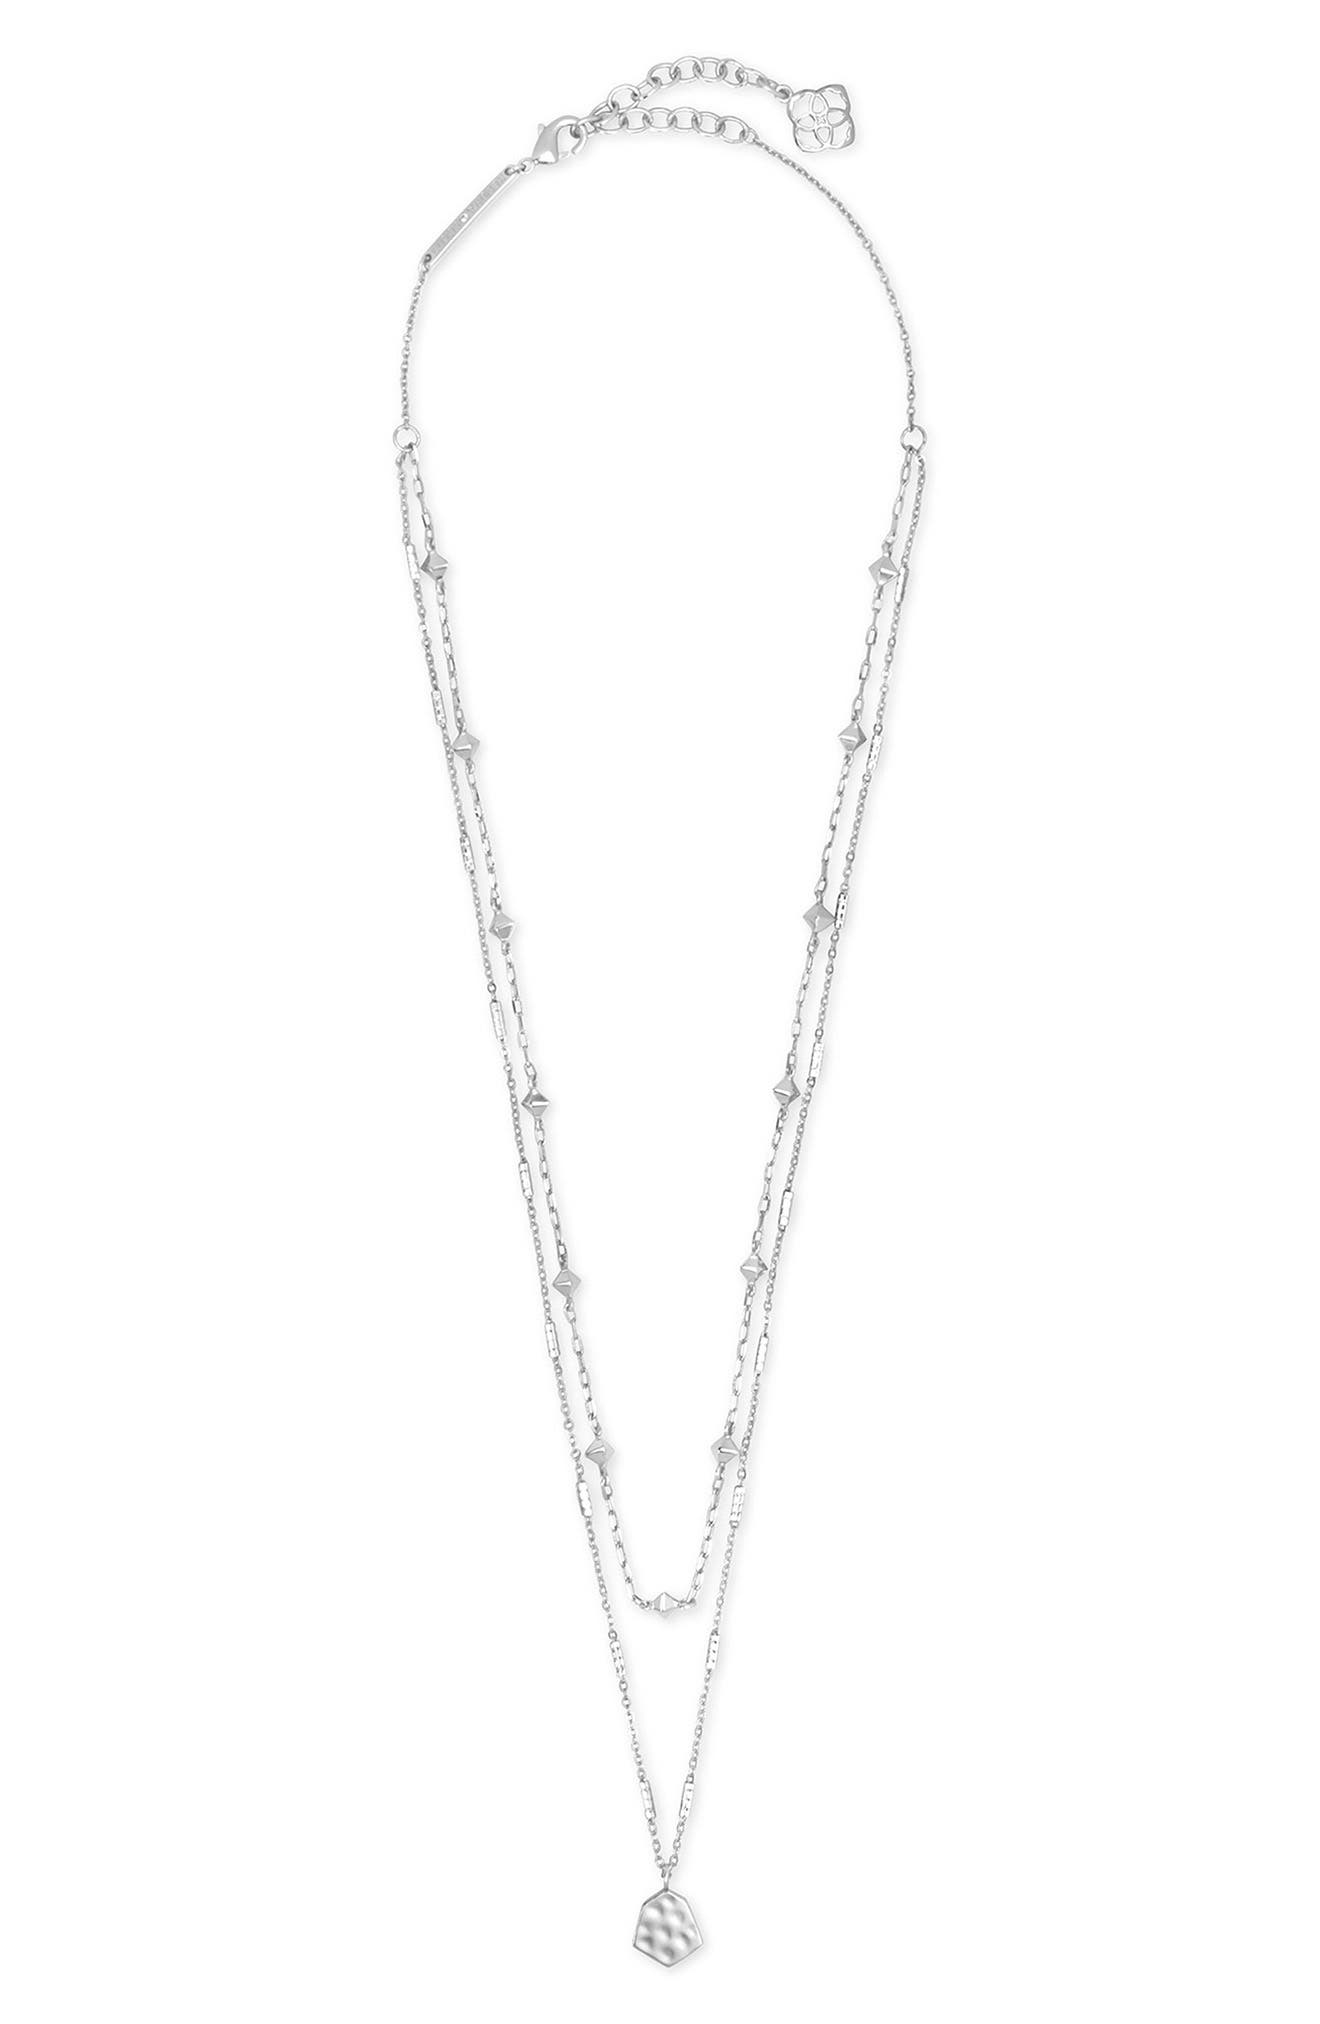 Sale > nordstrom womens necklaces > in stock